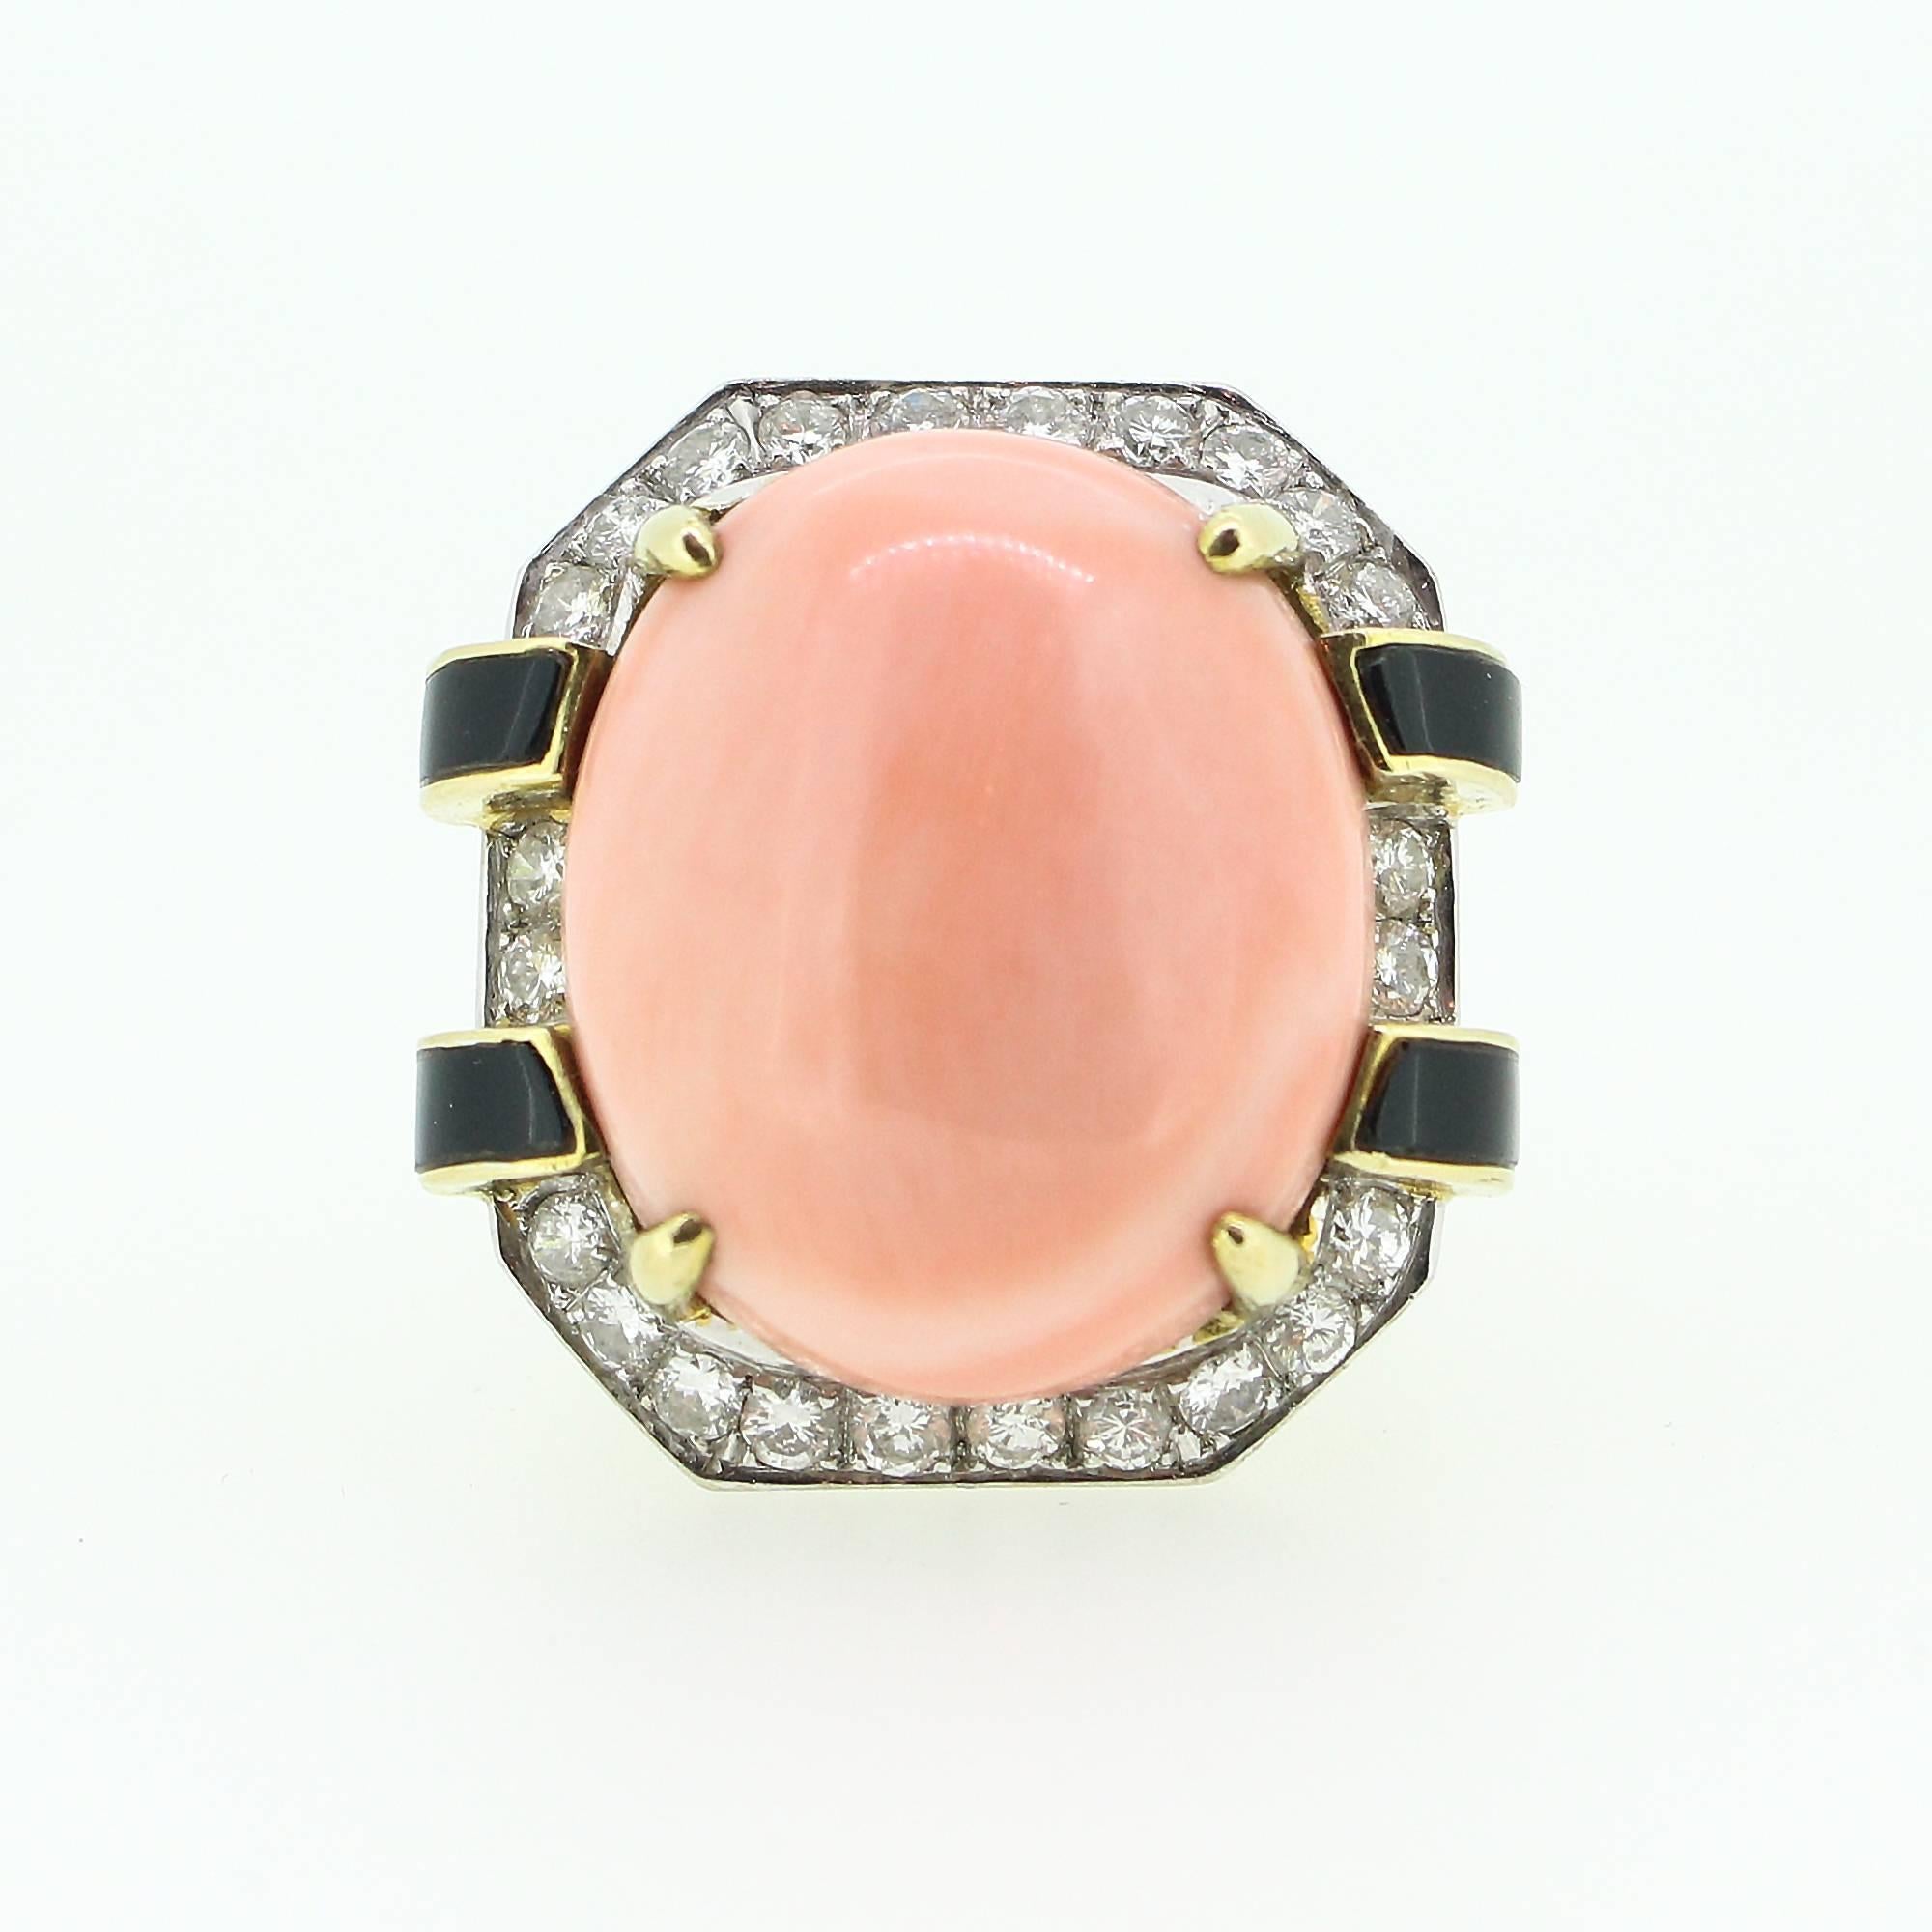 This beautifully made ring centers a 23.6 x 19.6 mm cabochon cut piece of coral set in yellow gold and accented by 4 pieces of black onyx and 24 round brilliant cut diamonds (1.44ctw apx, 